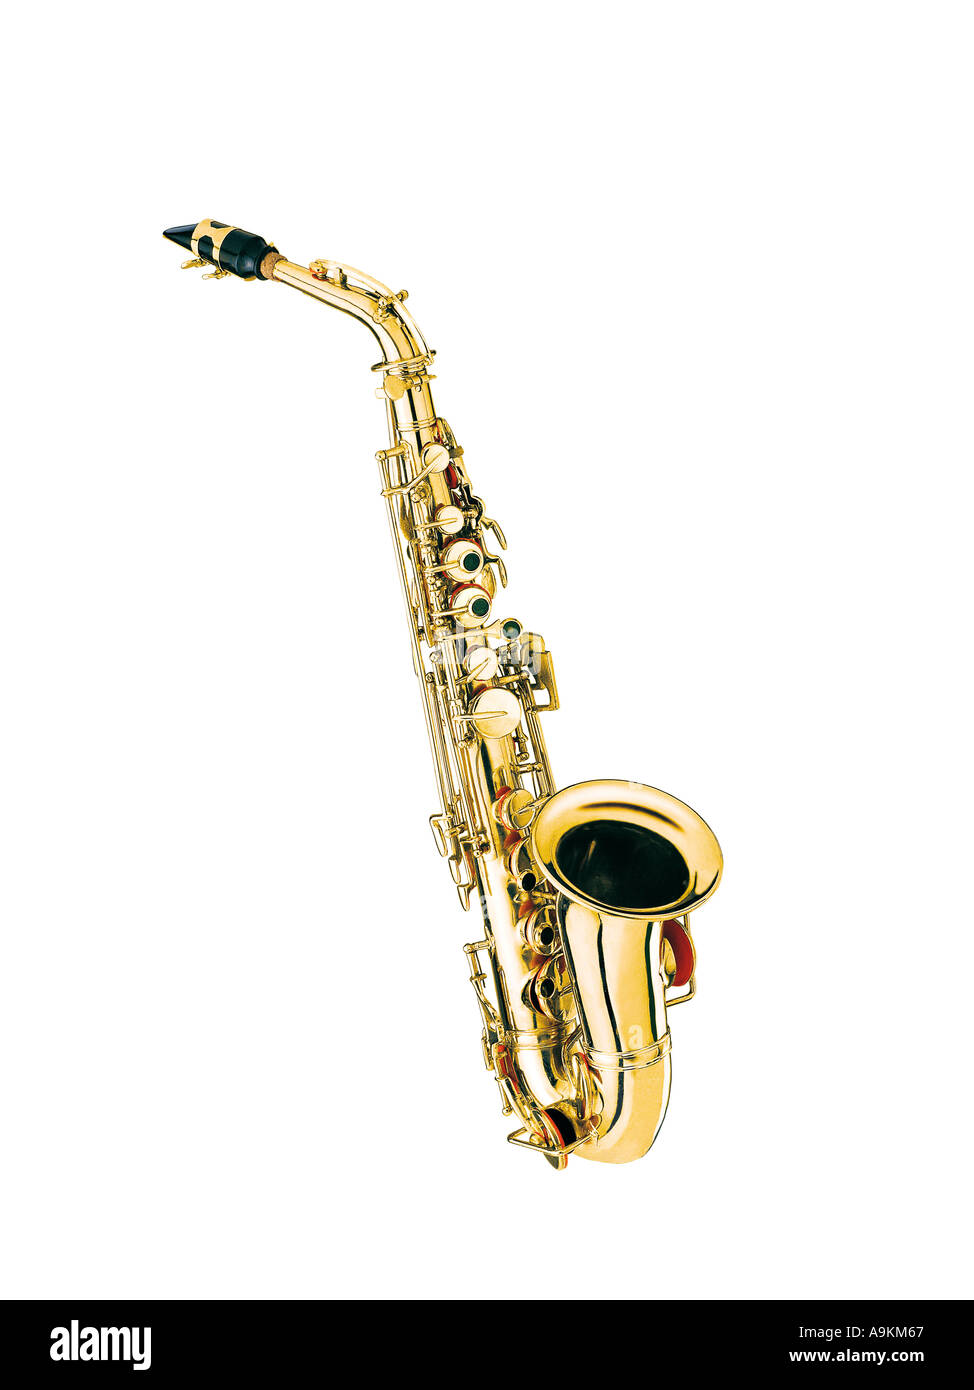 Musical Instrument saxophone Gold plated shining on white background suitable for cut out cover Stock Photo